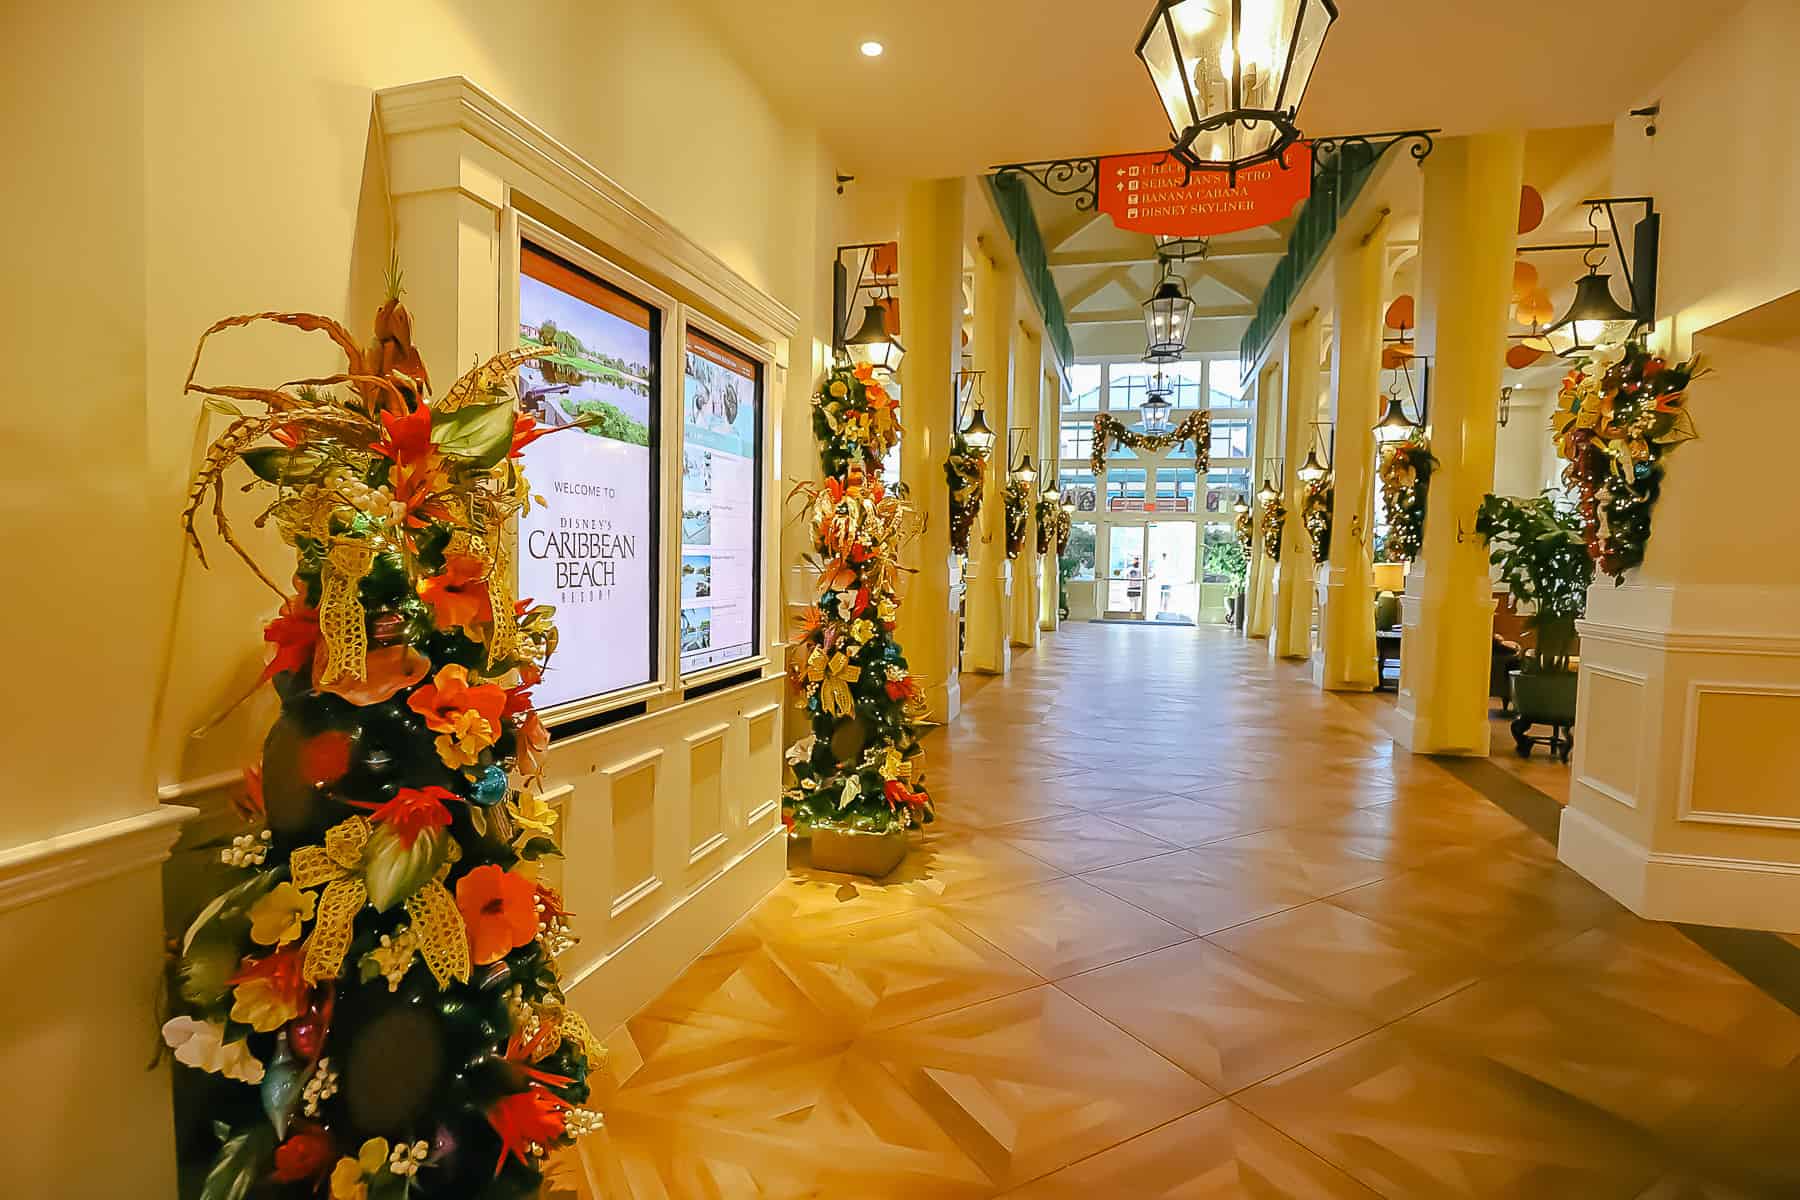 Miniature Christmas Trees that are themed to match the island vibe of Disney's Caribbean Beach. 